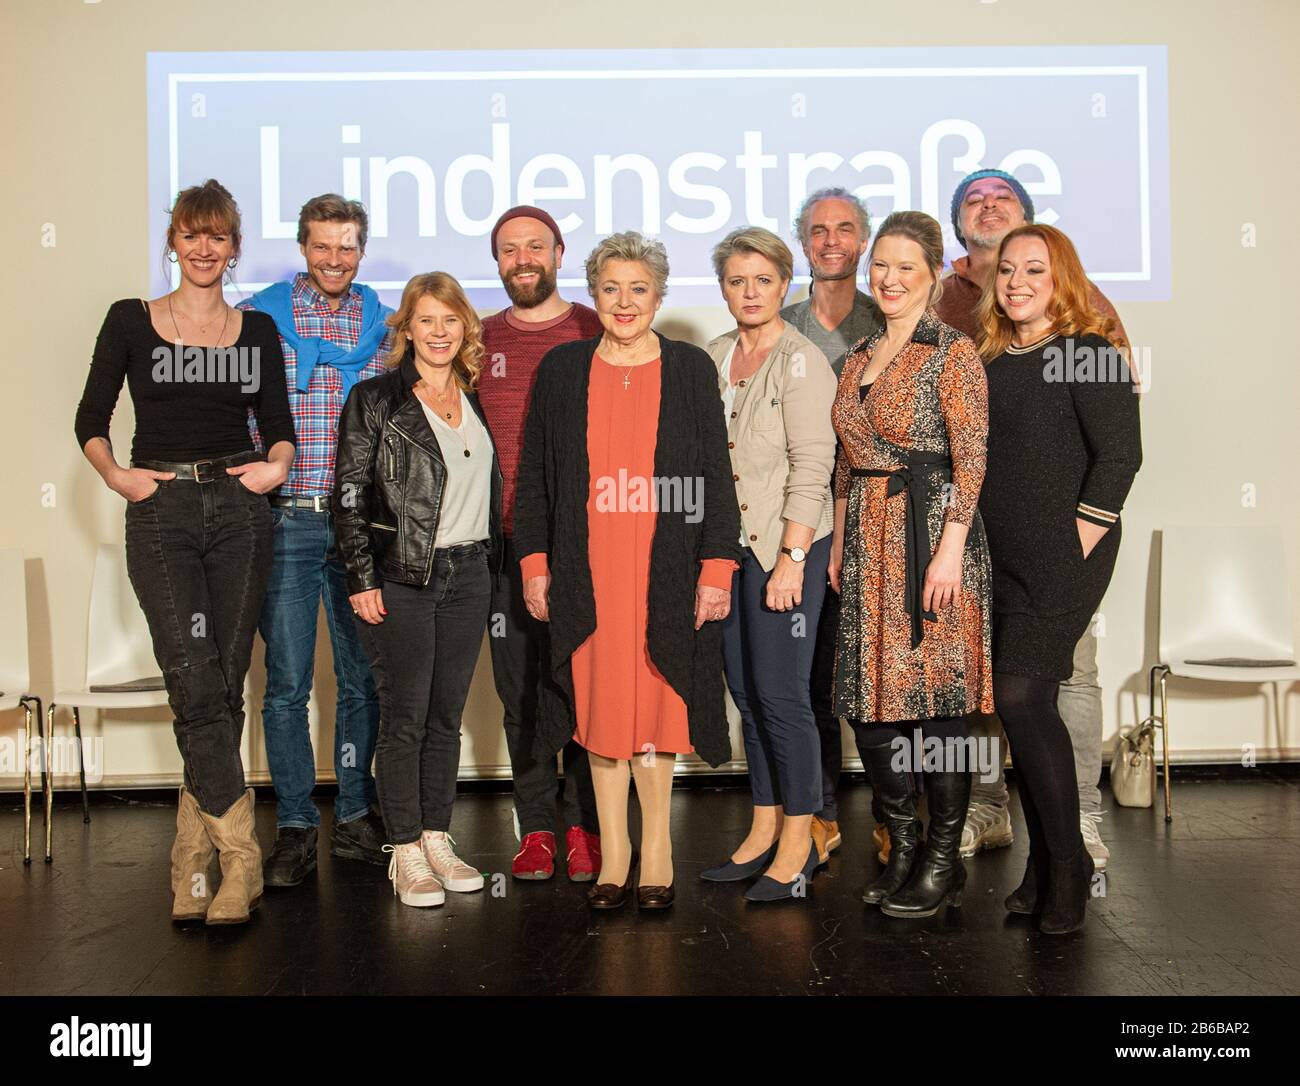 Langenhagen, Germany. 10th Mar, 2020. At a press conference of long-standing performers of the ARD cult series 'Lindenstraße' in the Maritim Hotel at Hanover Airport, the actors (l-r) Cosima Viola, Felix Maximilian, Jacqueline Svilarov, Moritz A. Sachs, Marie-Luise Marjan, Andrea Spatzek, Moritz Zielke, Sybille Waury, Erkan Gündüz and Rebecca Siemoneit-Barum will be together for a group photo. After 34 years, the last episode of the TV series 'Lindenstraße' will be broadcast on 29.03.20. Credit: Lucas Bäuml/dpa/Alamy Live News Stock Photo